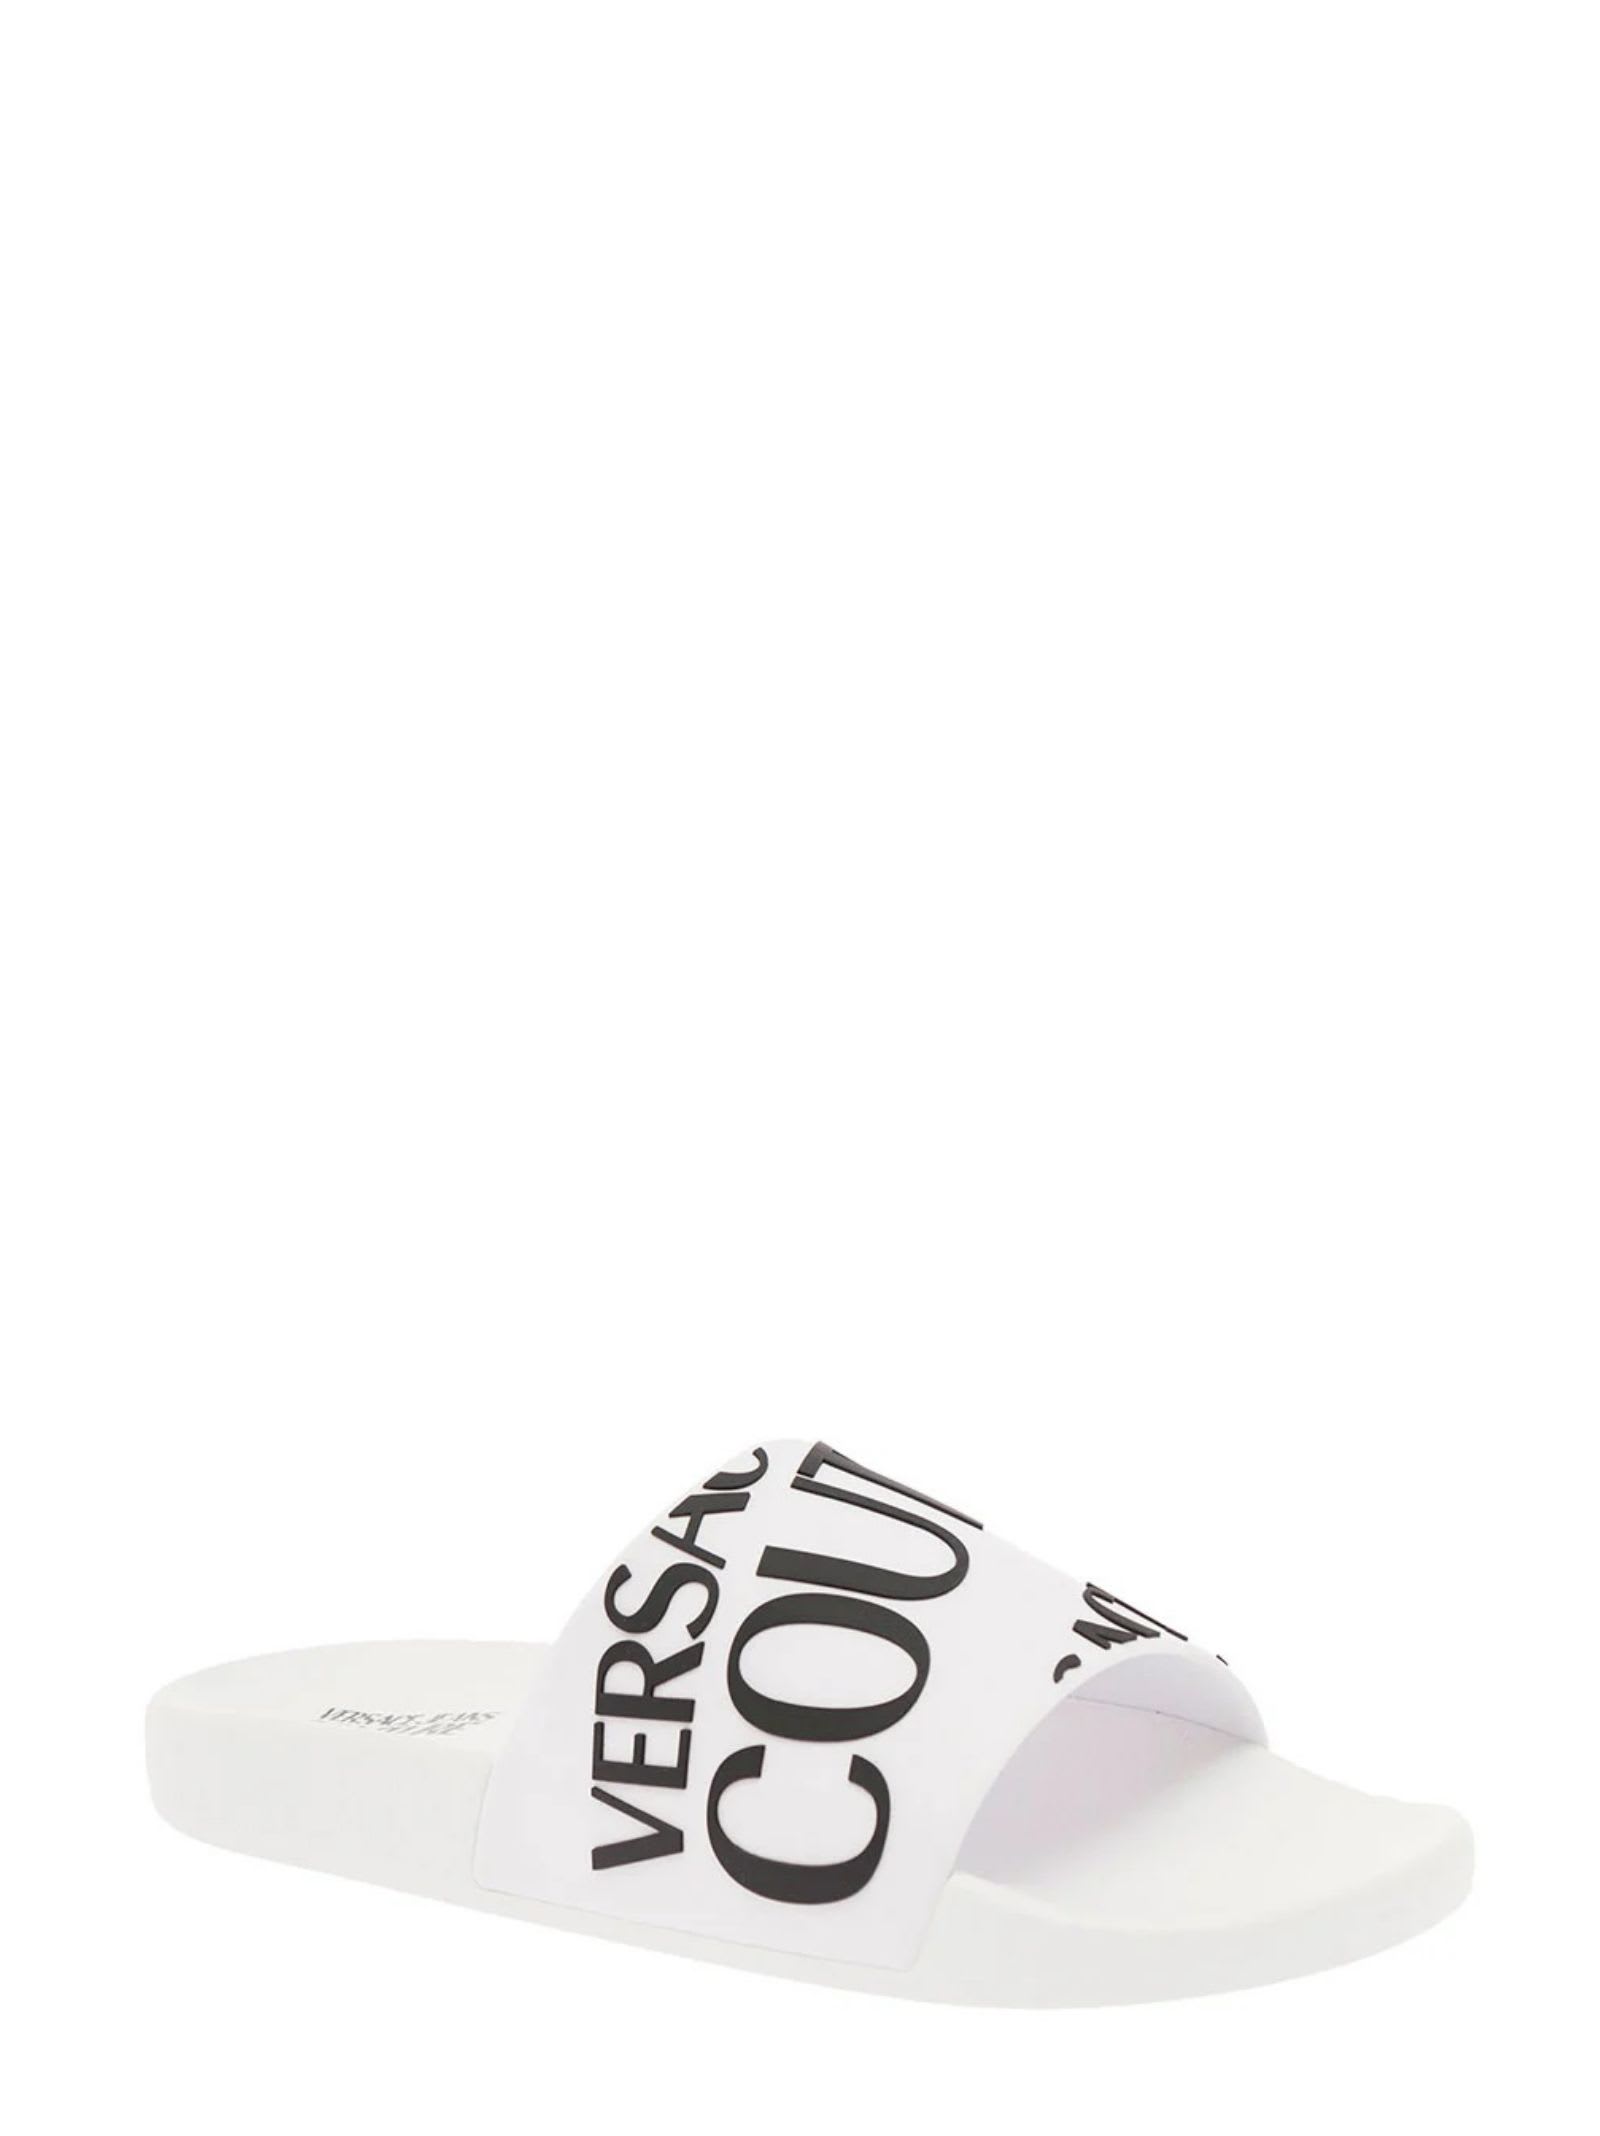 Shop Versace Jeans Couture Shoes In White